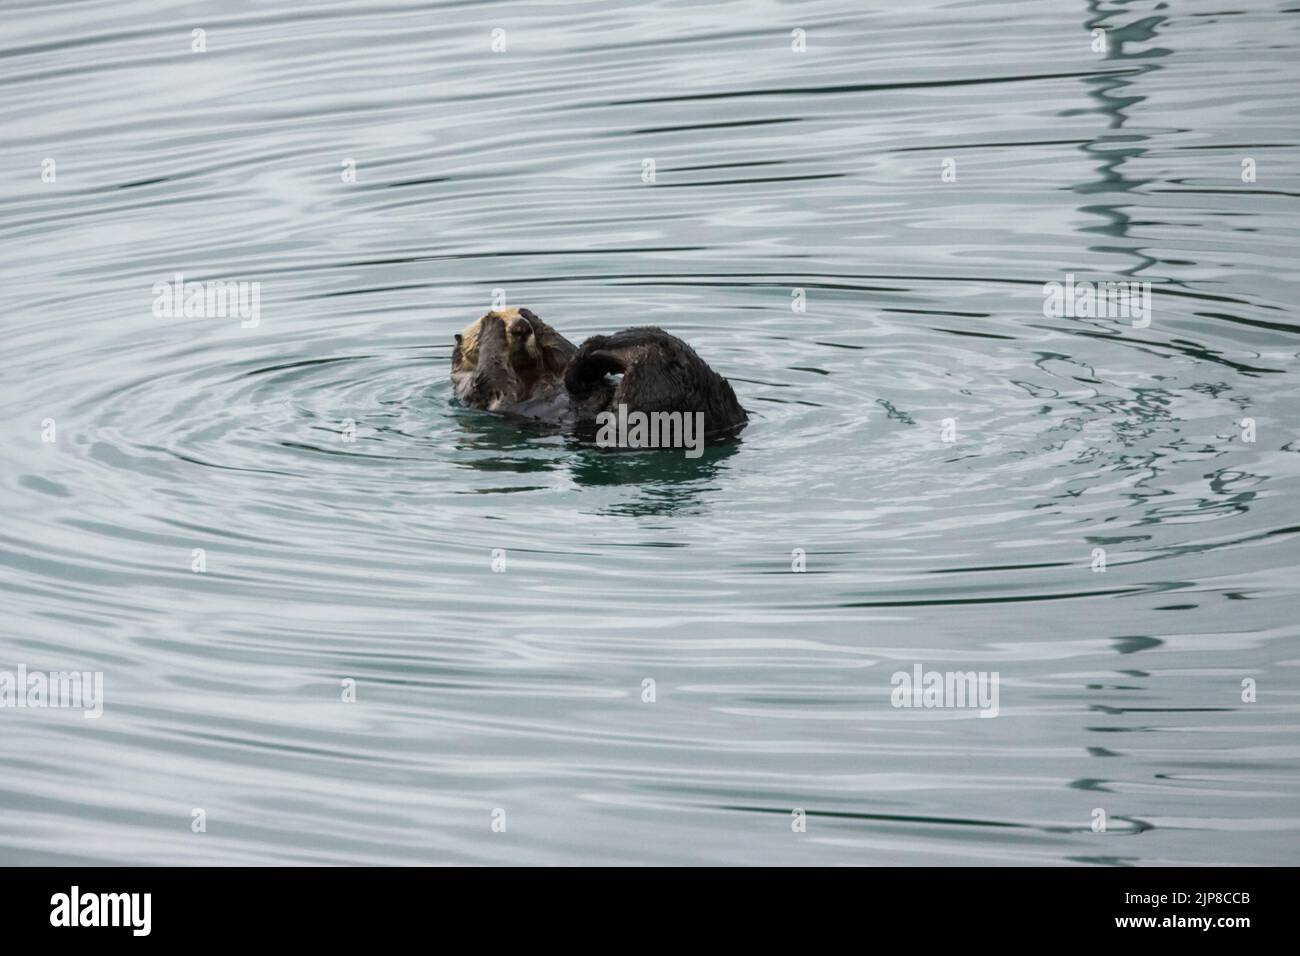 Sea otters in the water at Whittier, Alaska, USA Stock Photo